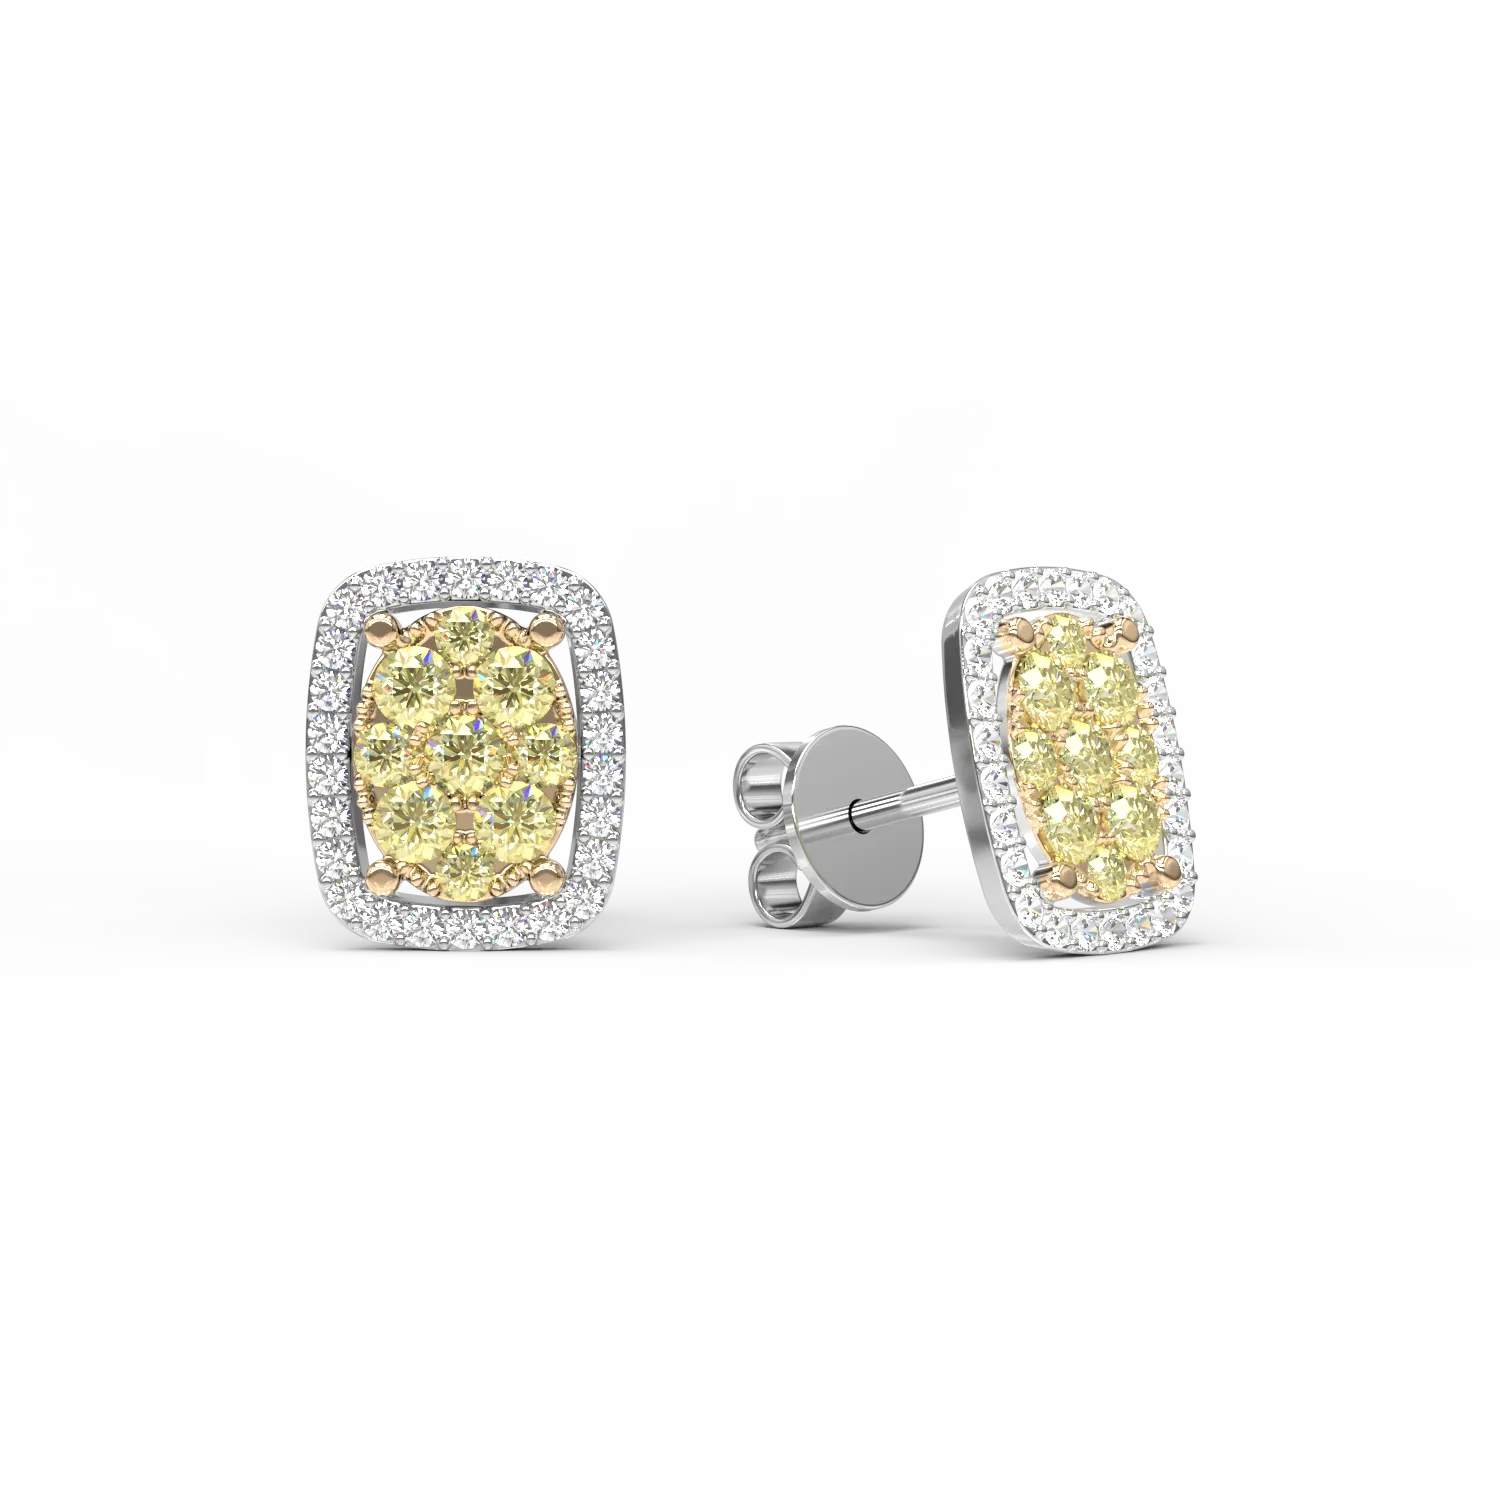 18K white gold earrings with 0.335ct yellow diamonds and 0.138ct diamonds